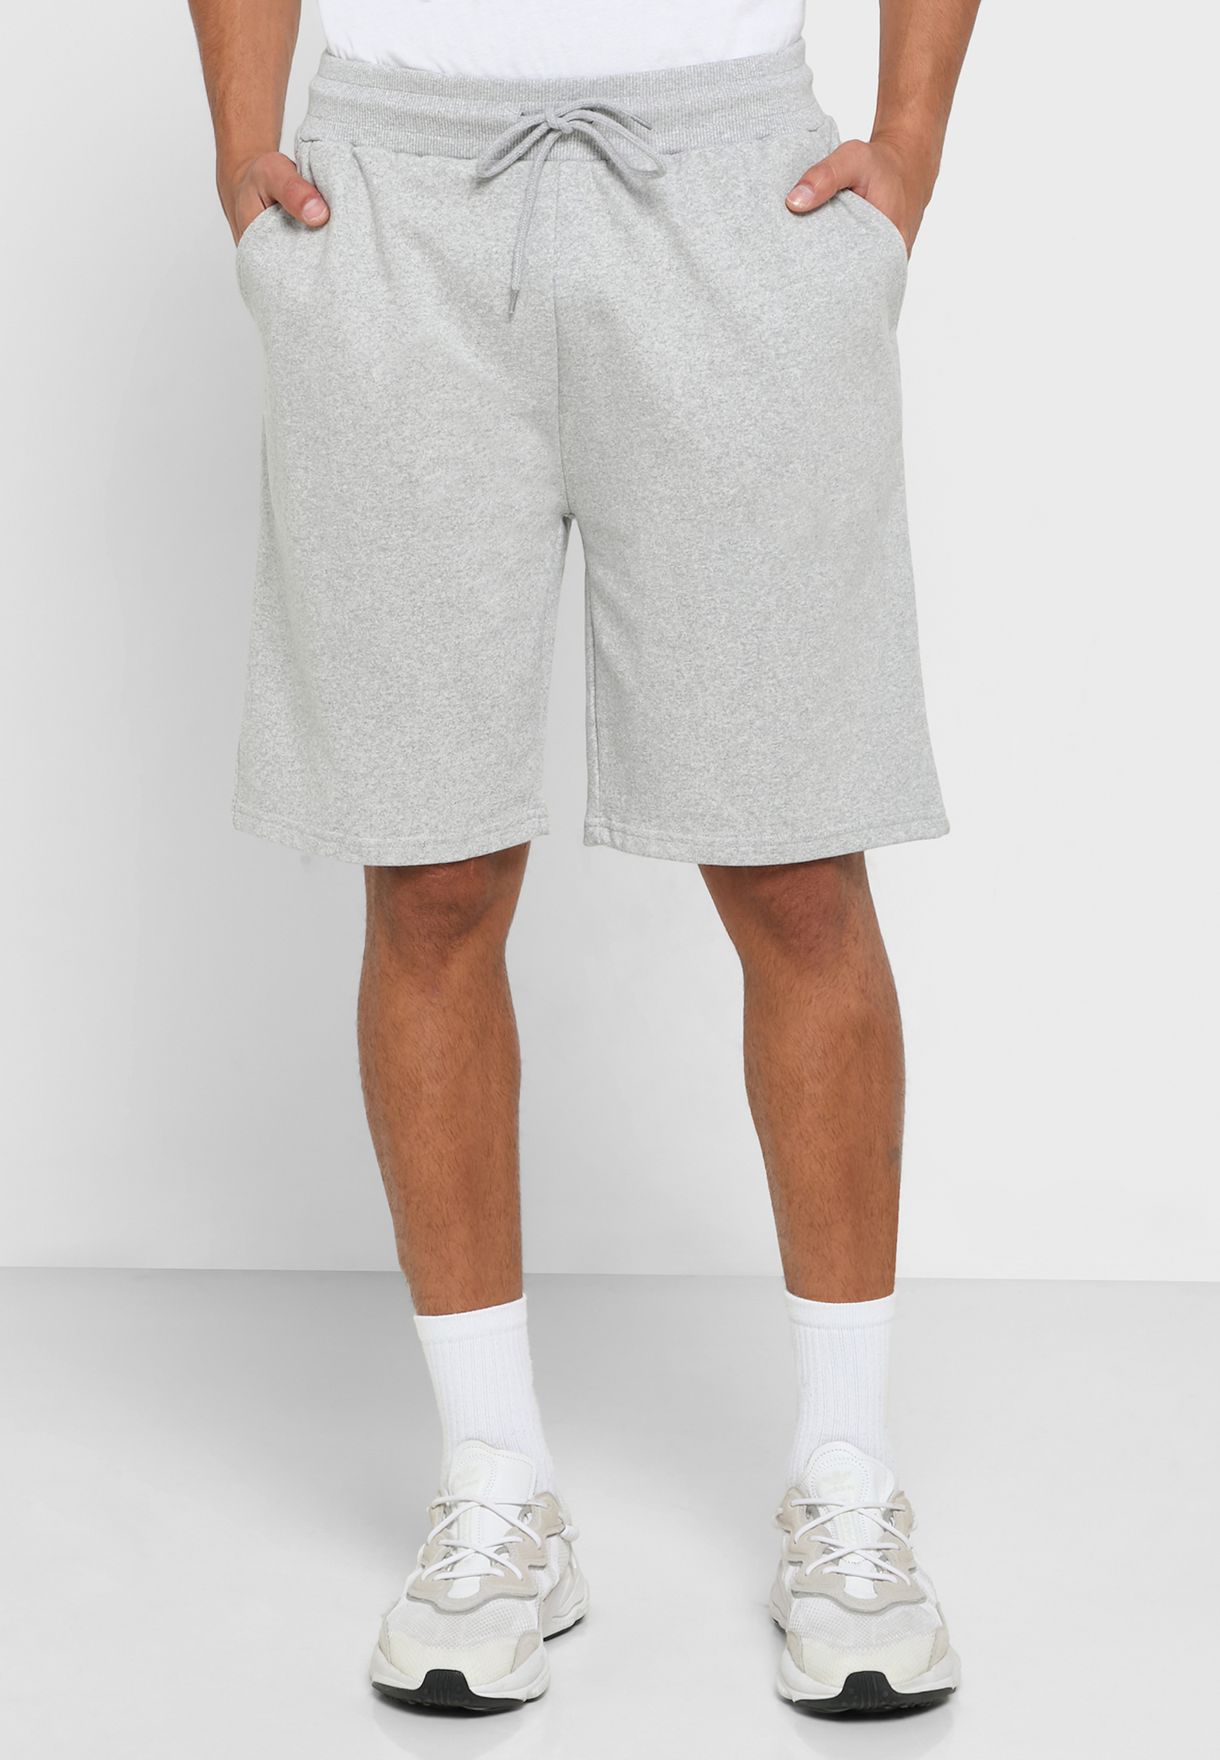 3 Pack Essential Lounge Shorts